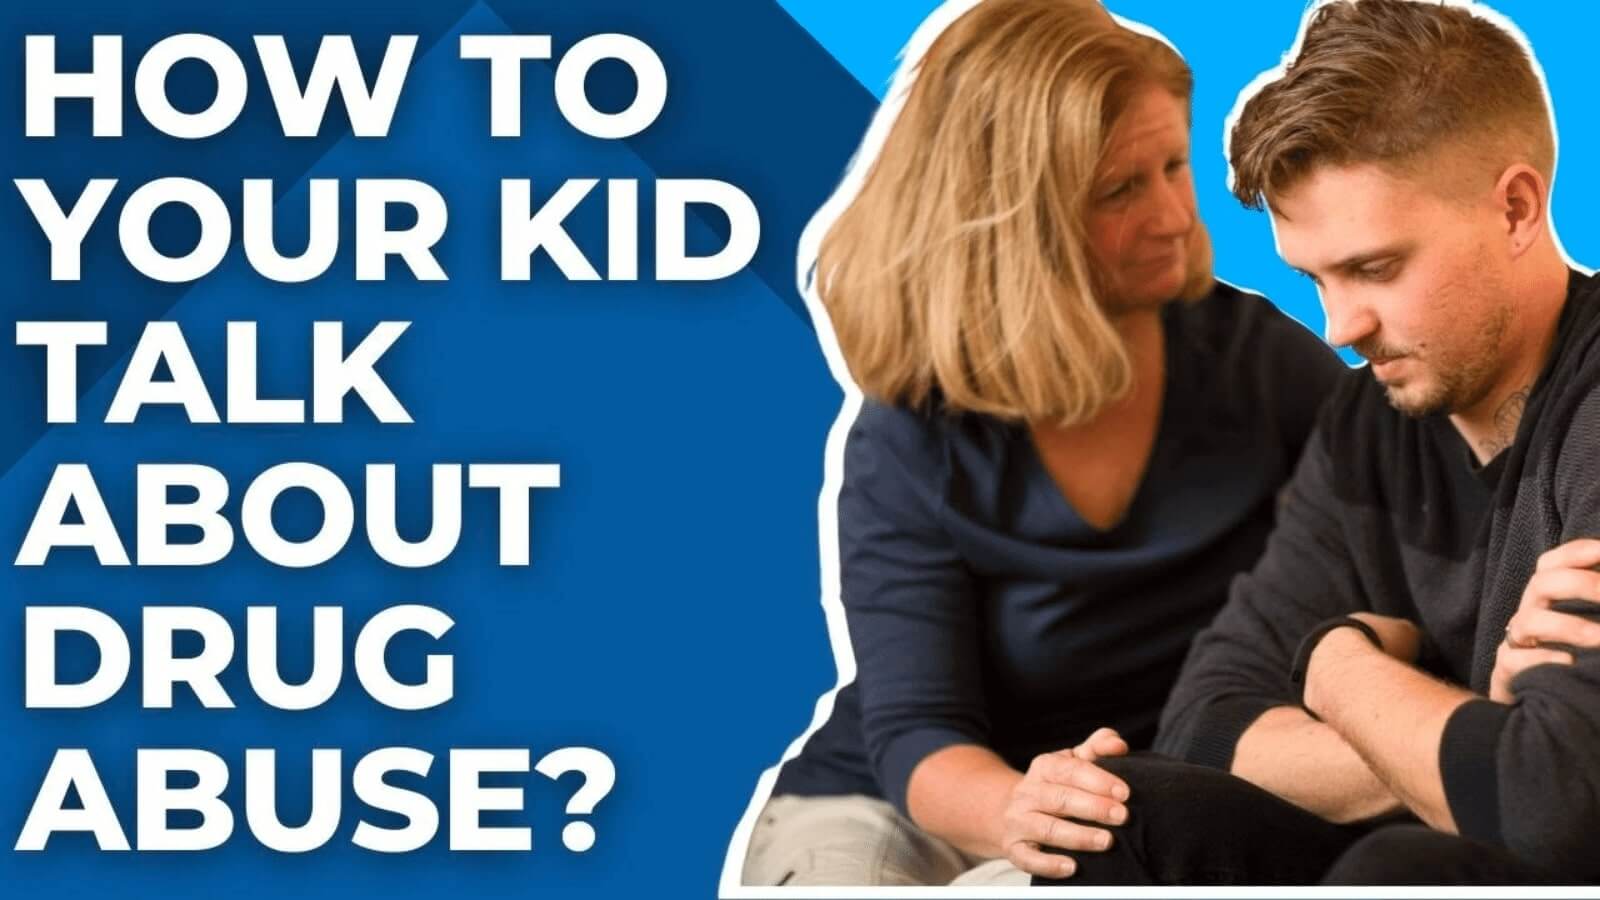 How to talk to your kid about drug abuse